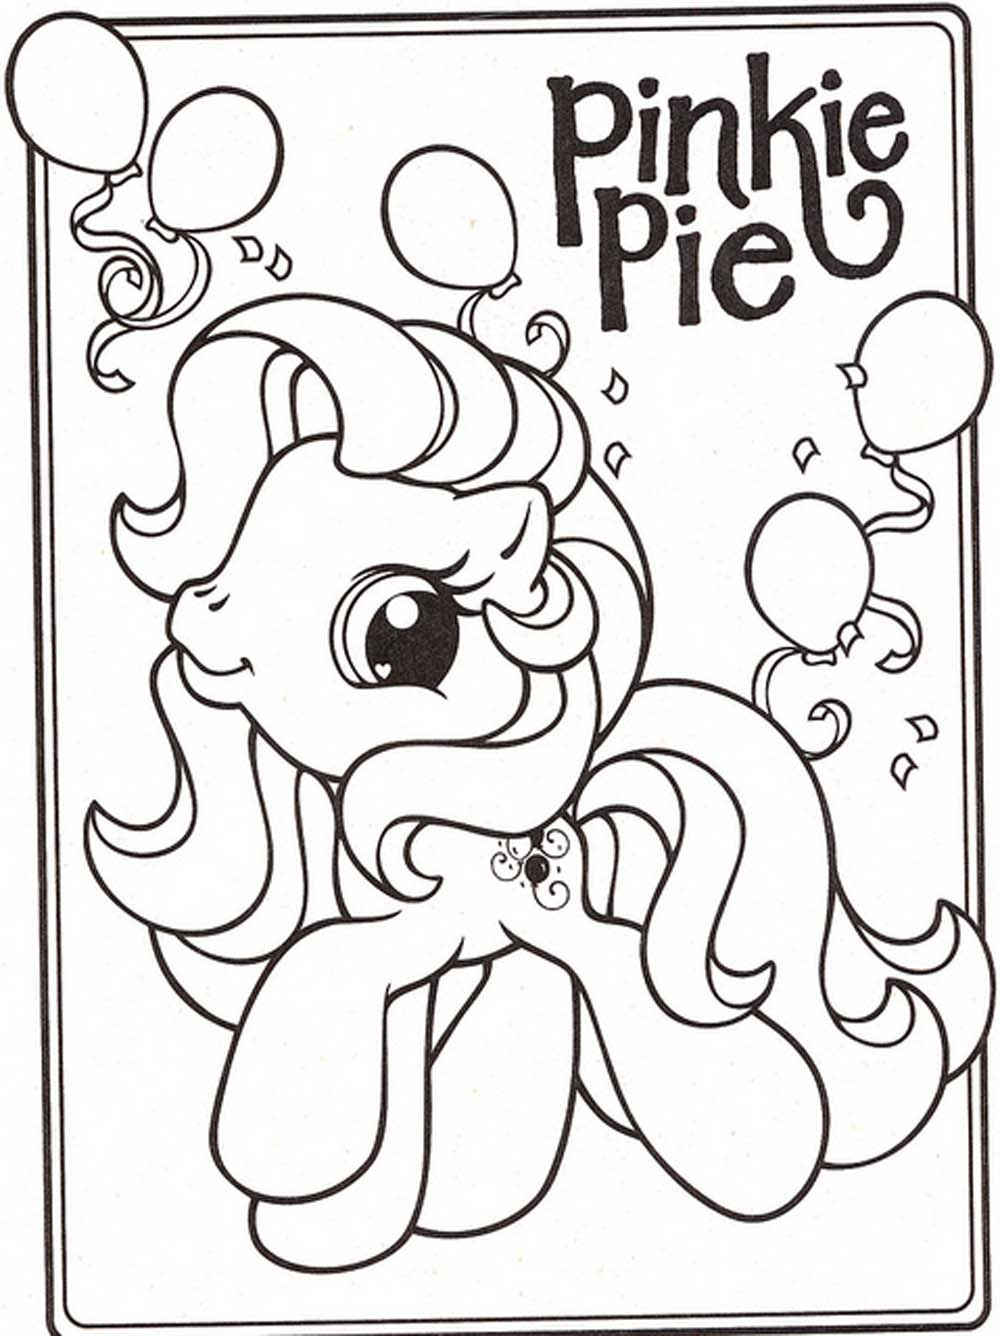 free-coloring-pages-my-little-pony | | BestAppsForKids.com